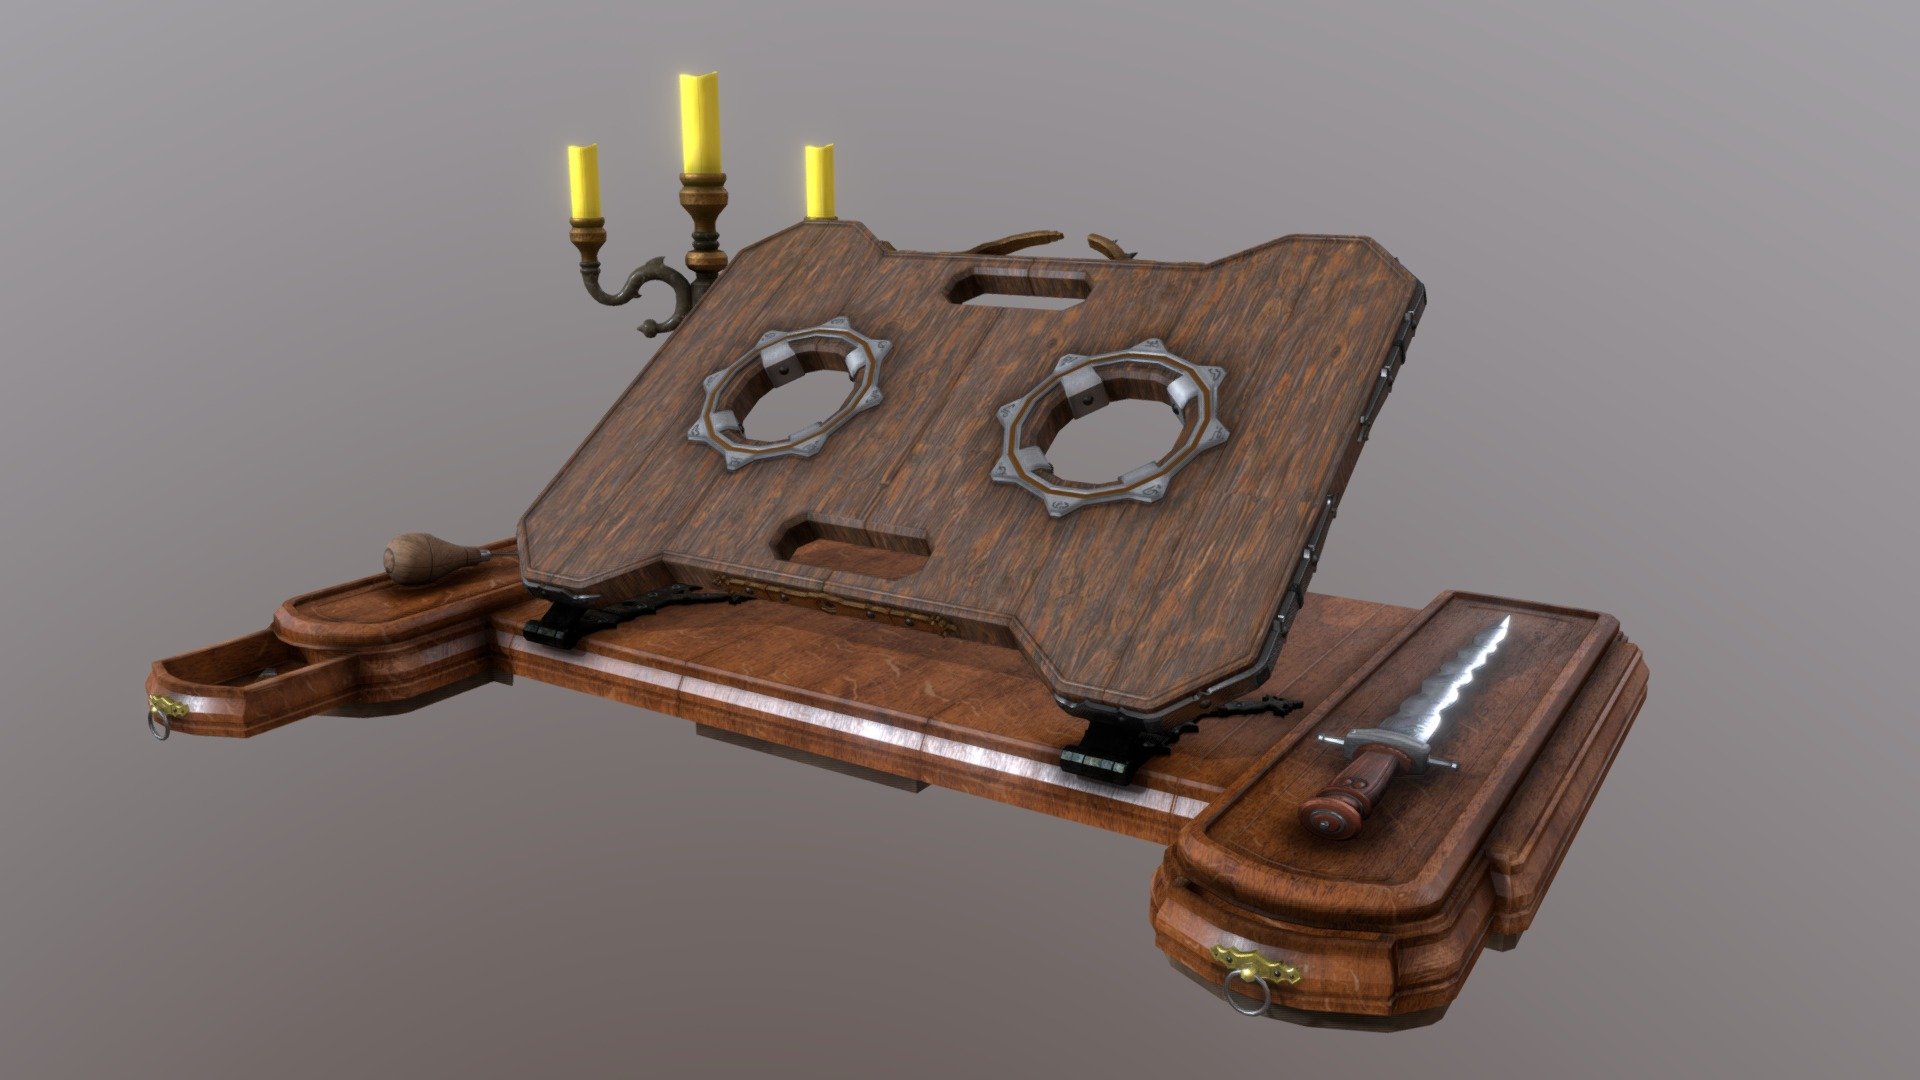 The lectern for the necronomicon.
With the cremonial dagger for the sacrifice and a pointed instrument to facilitate the cooperation of the victim of the ritual 3d model